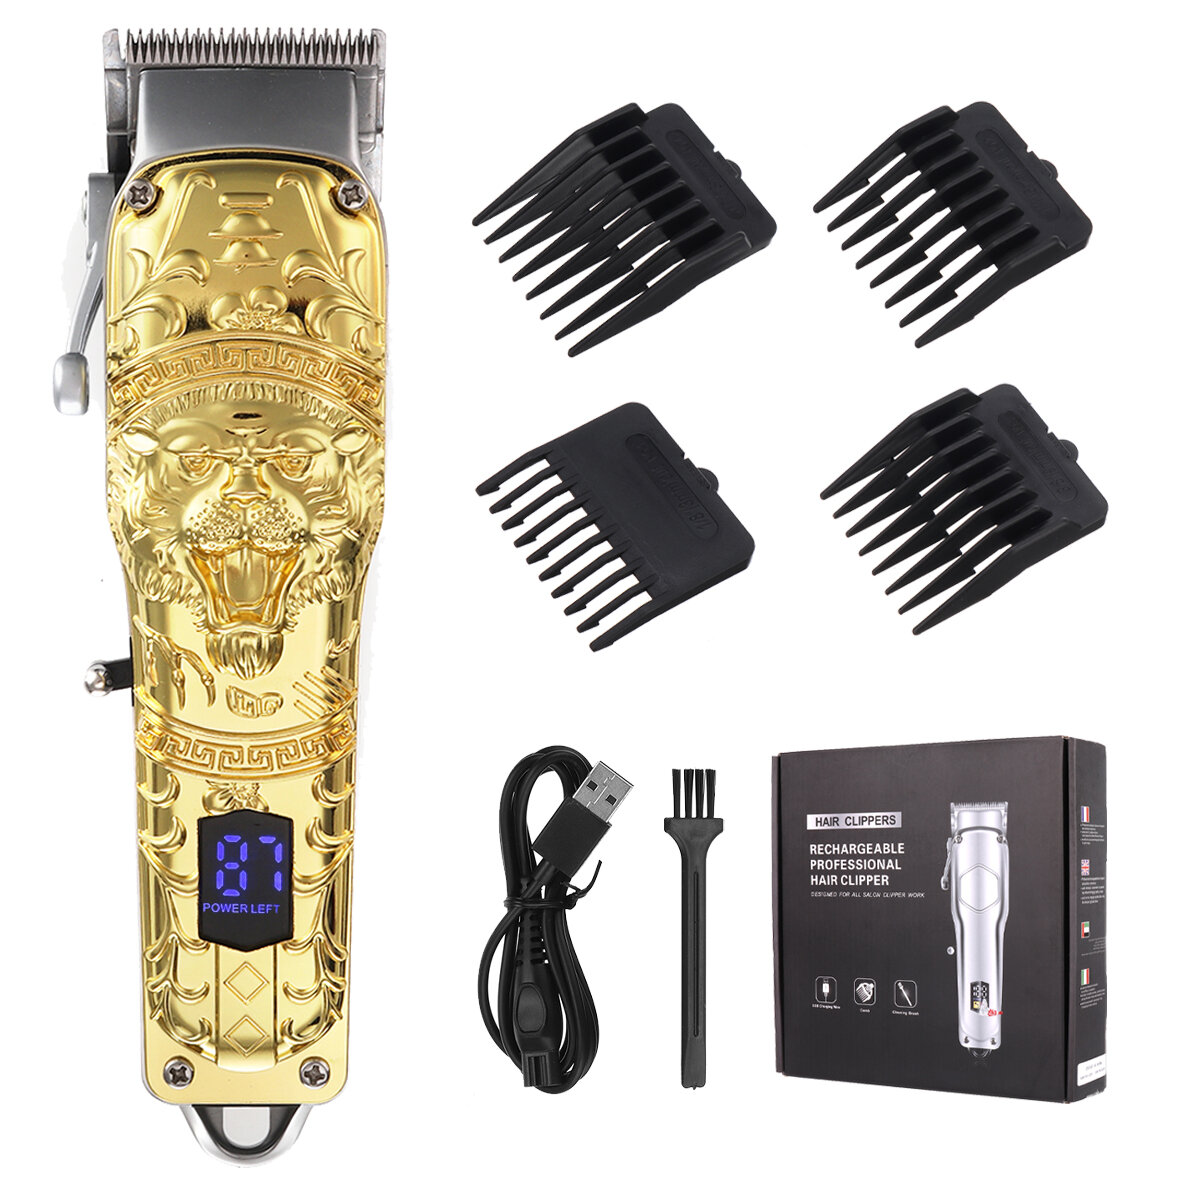 0.1-3mm 4 Gear Electric Hair Clipper Men All-metal Rechargeable Hair Trimmer Shaver Barber W/ 4pcs Limit Combs